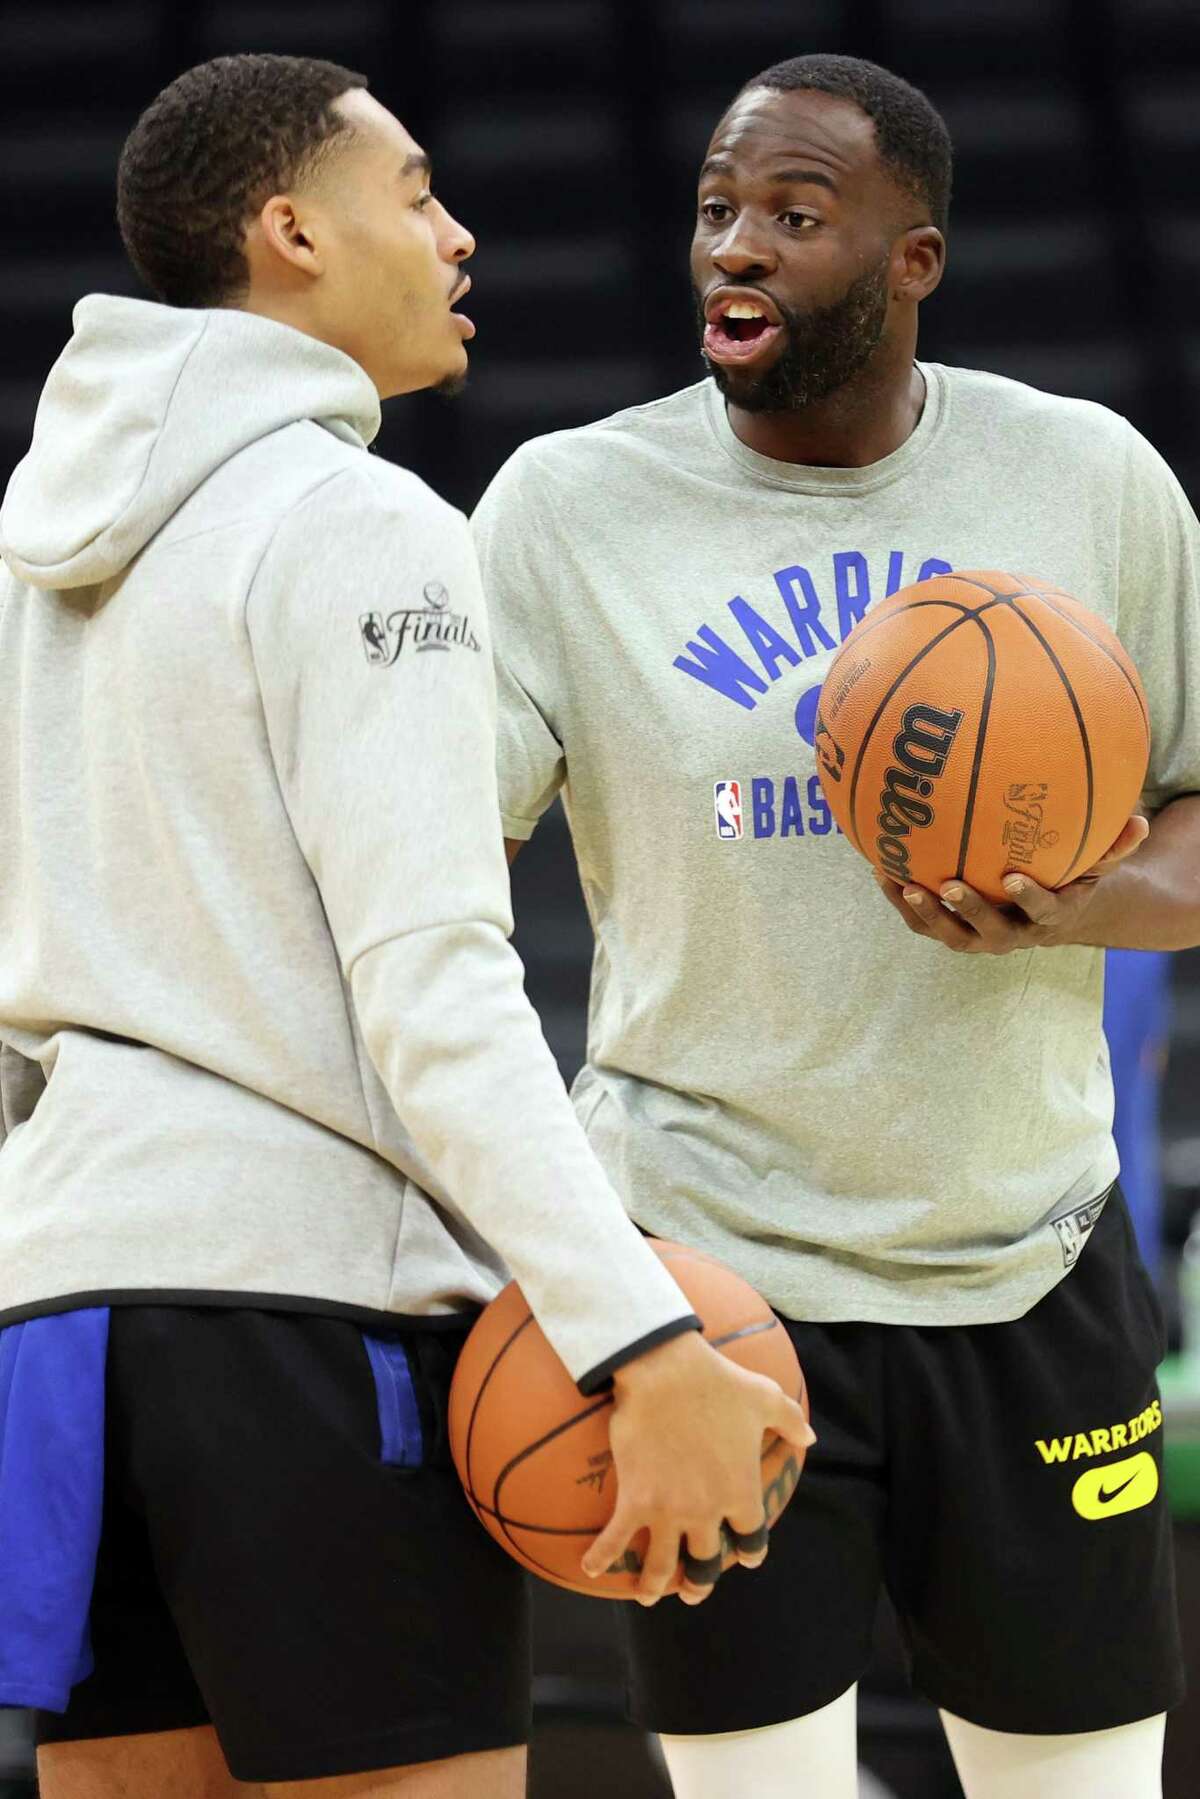 Golden State Warriors’ Draymond Green and Jordan Poole during practice before Game 3 of NBA Finals at TD Garden in Boston, Massachusetts, on Tuesday, June 7, 2022.